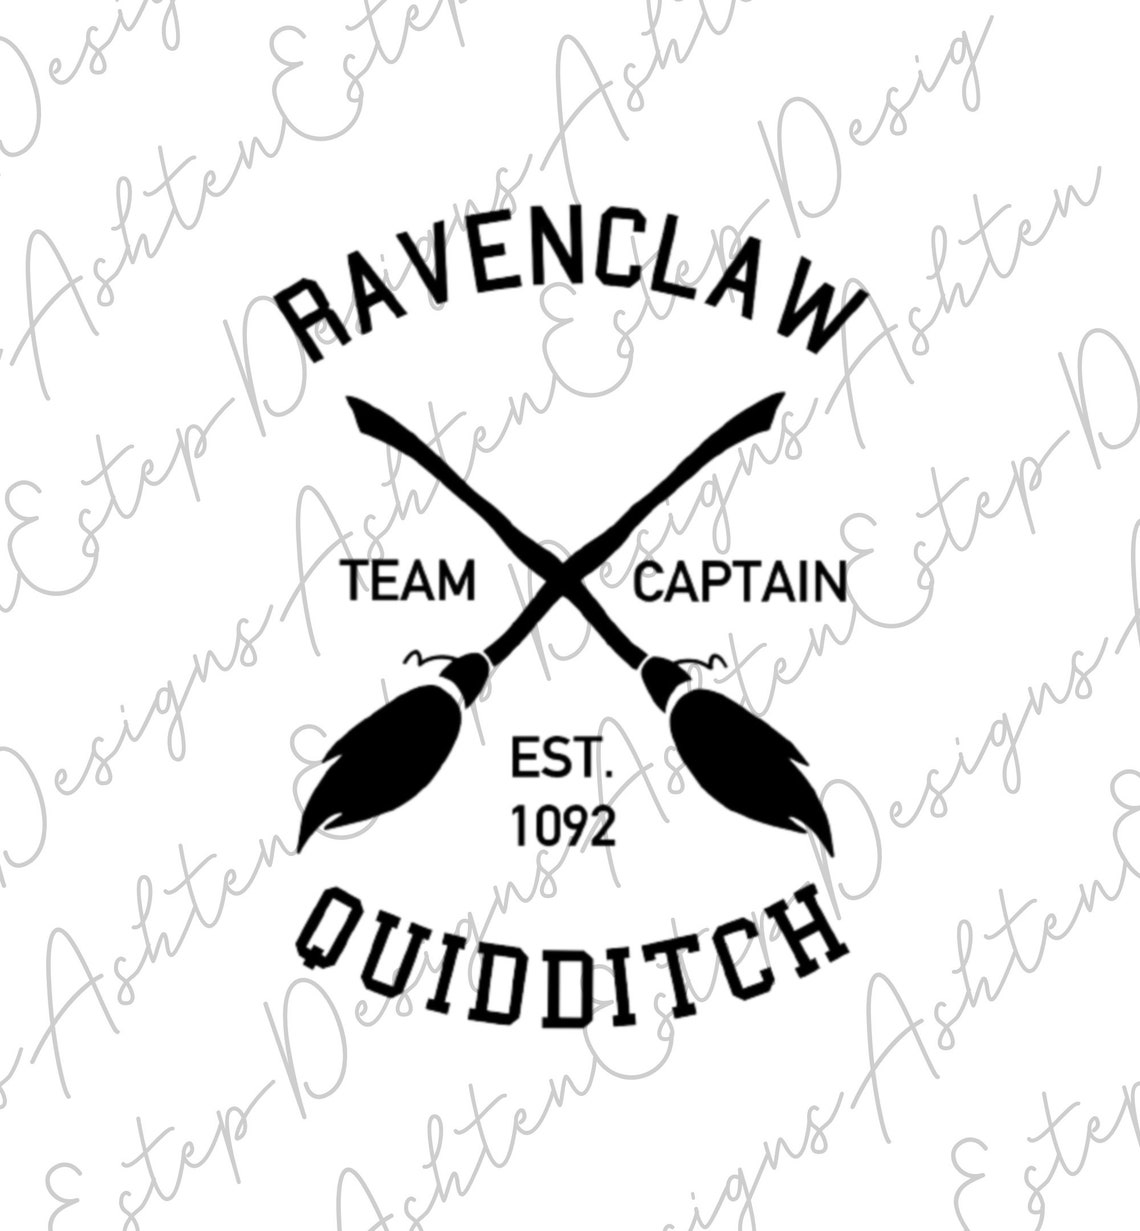 Ravenclaw Quidditch Ravenclaw SVG Ravenclaw PNG Ravenclaw | Etsy